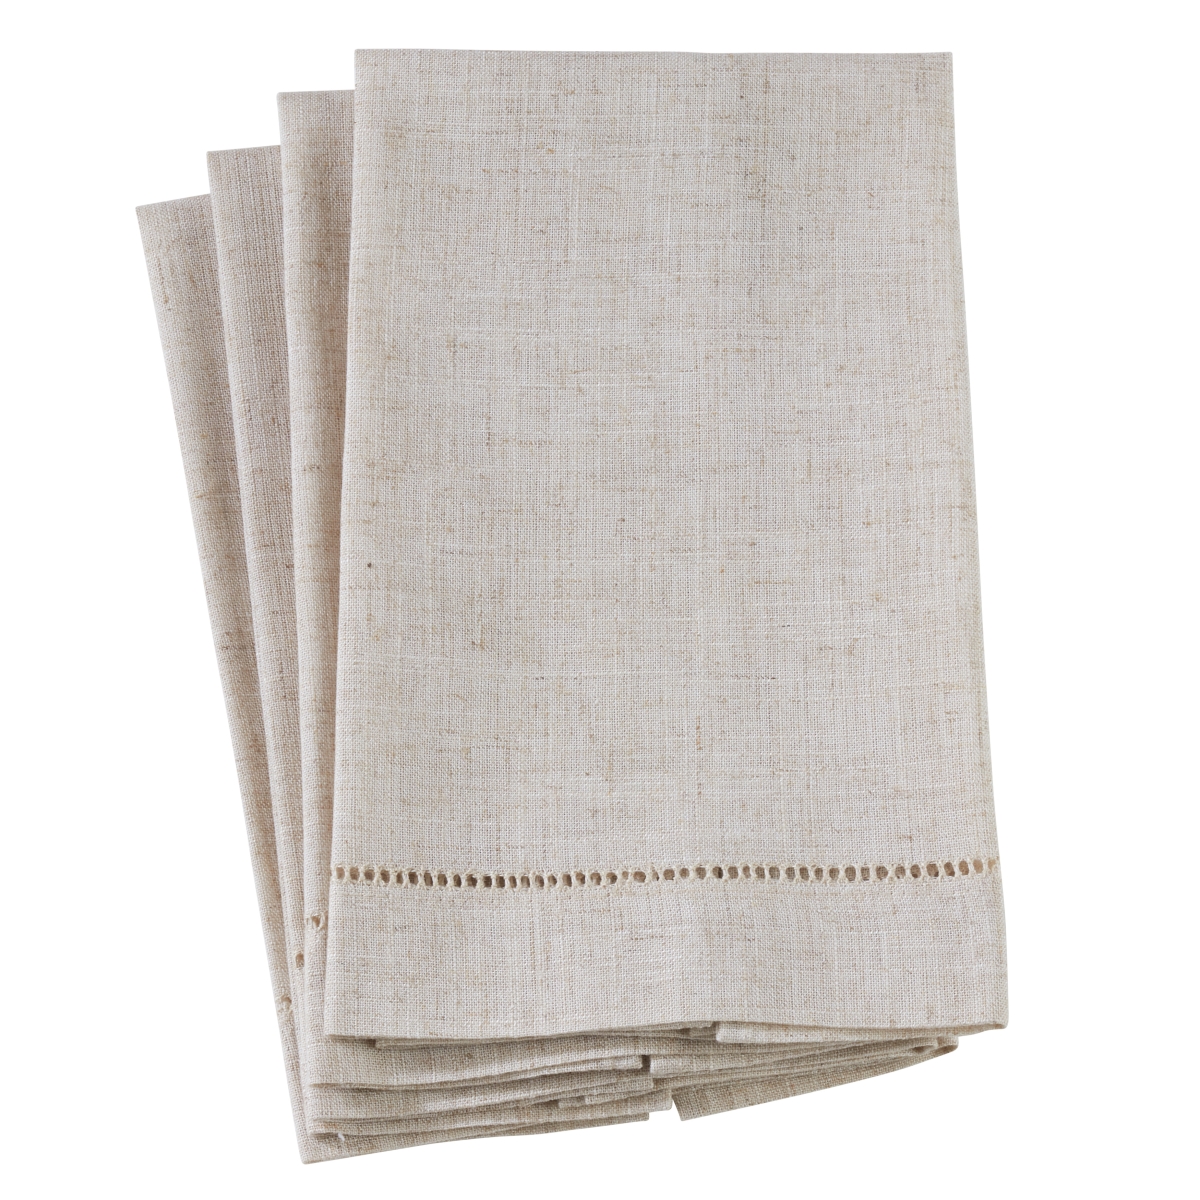 512.n1422 14 X 22 In. Poly & Linen Blend Guest Towels With Plain Hemstitch Design - Natural